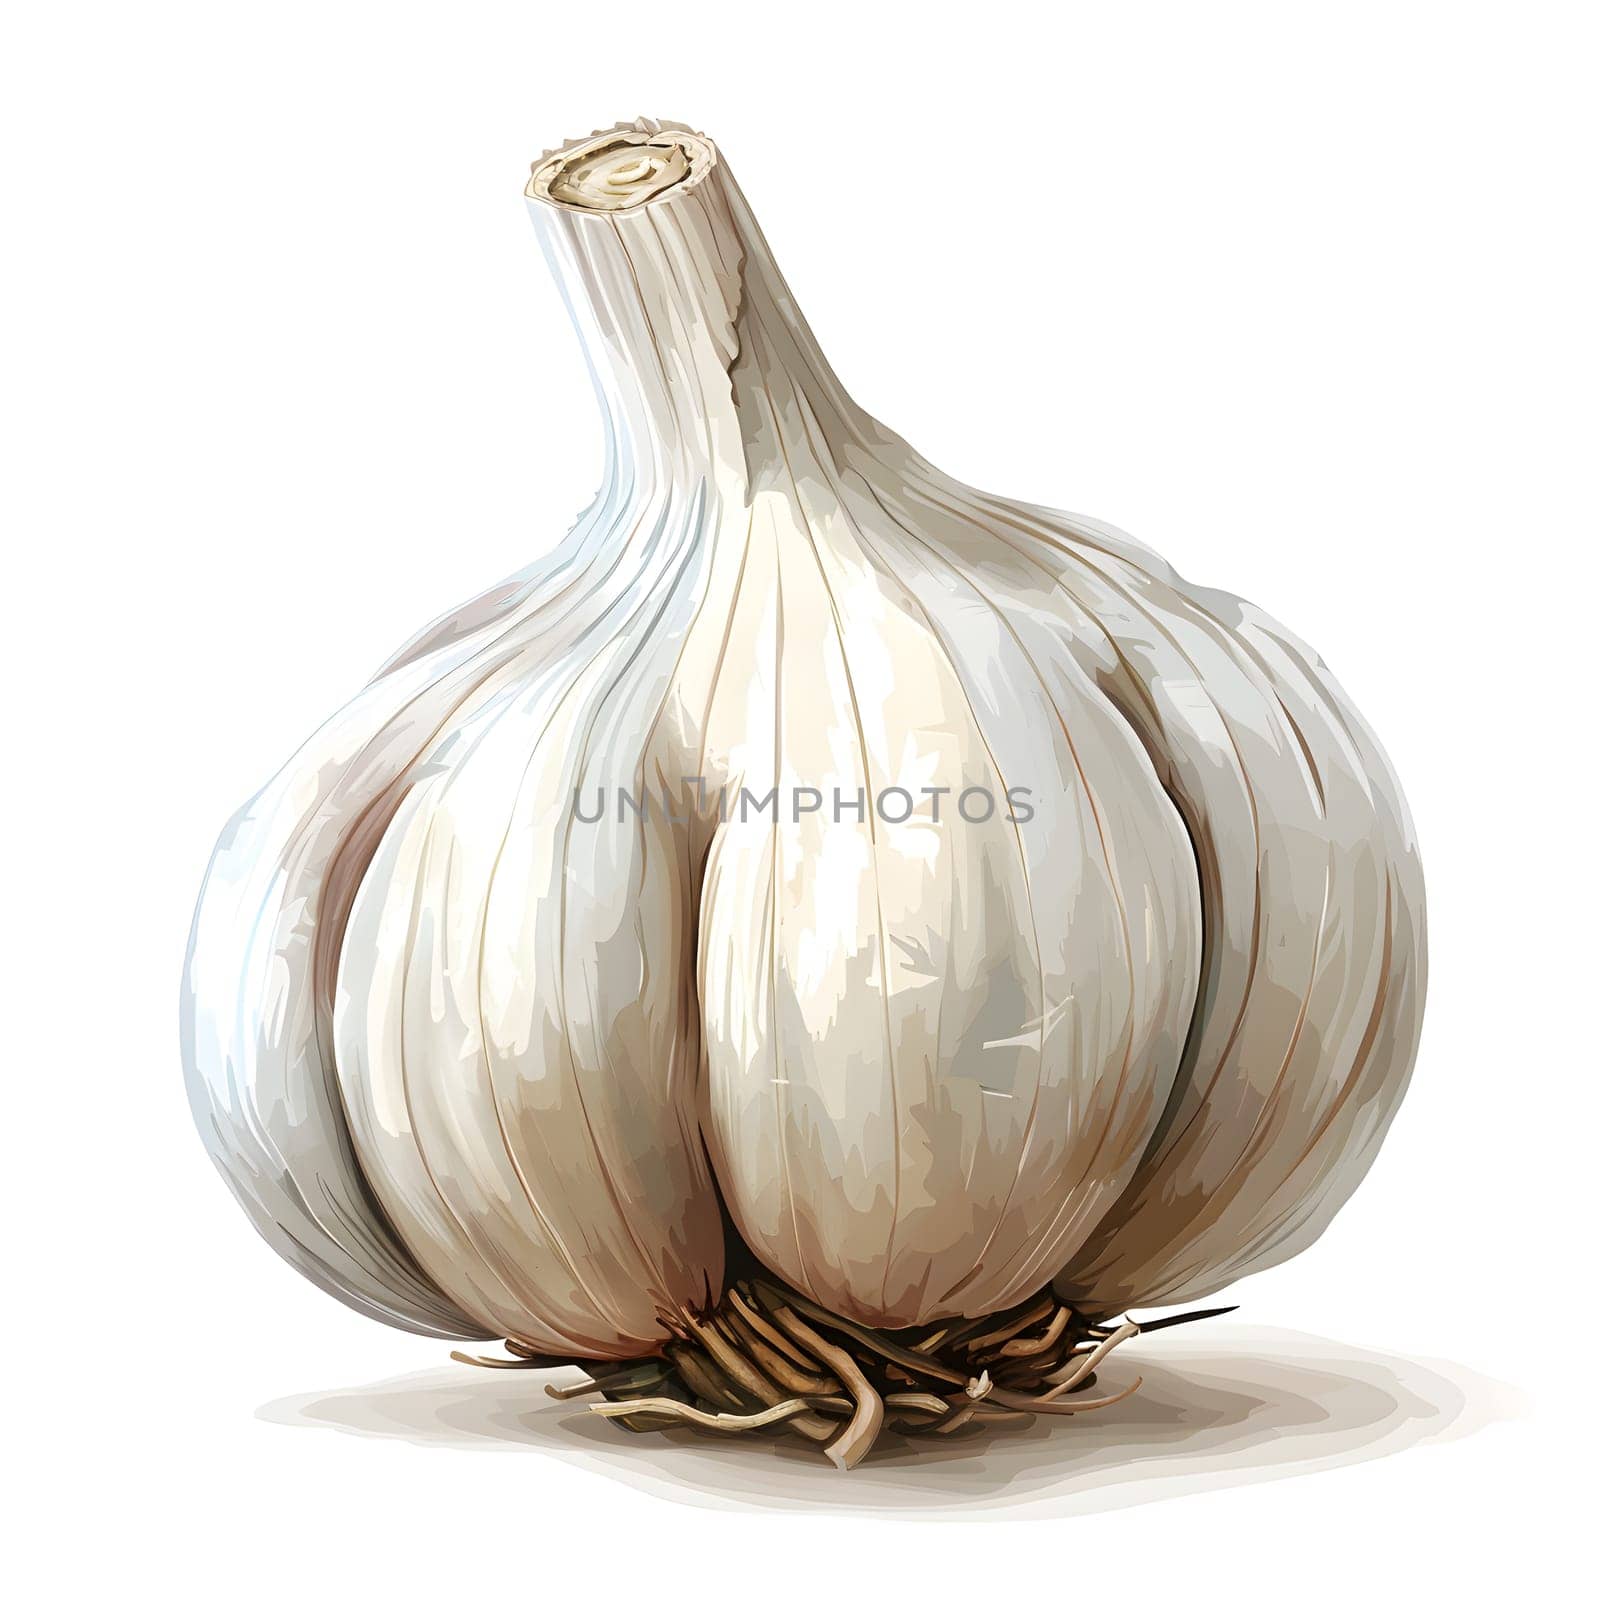 a close up of a garlic bulb on a white background by Nadtochiy